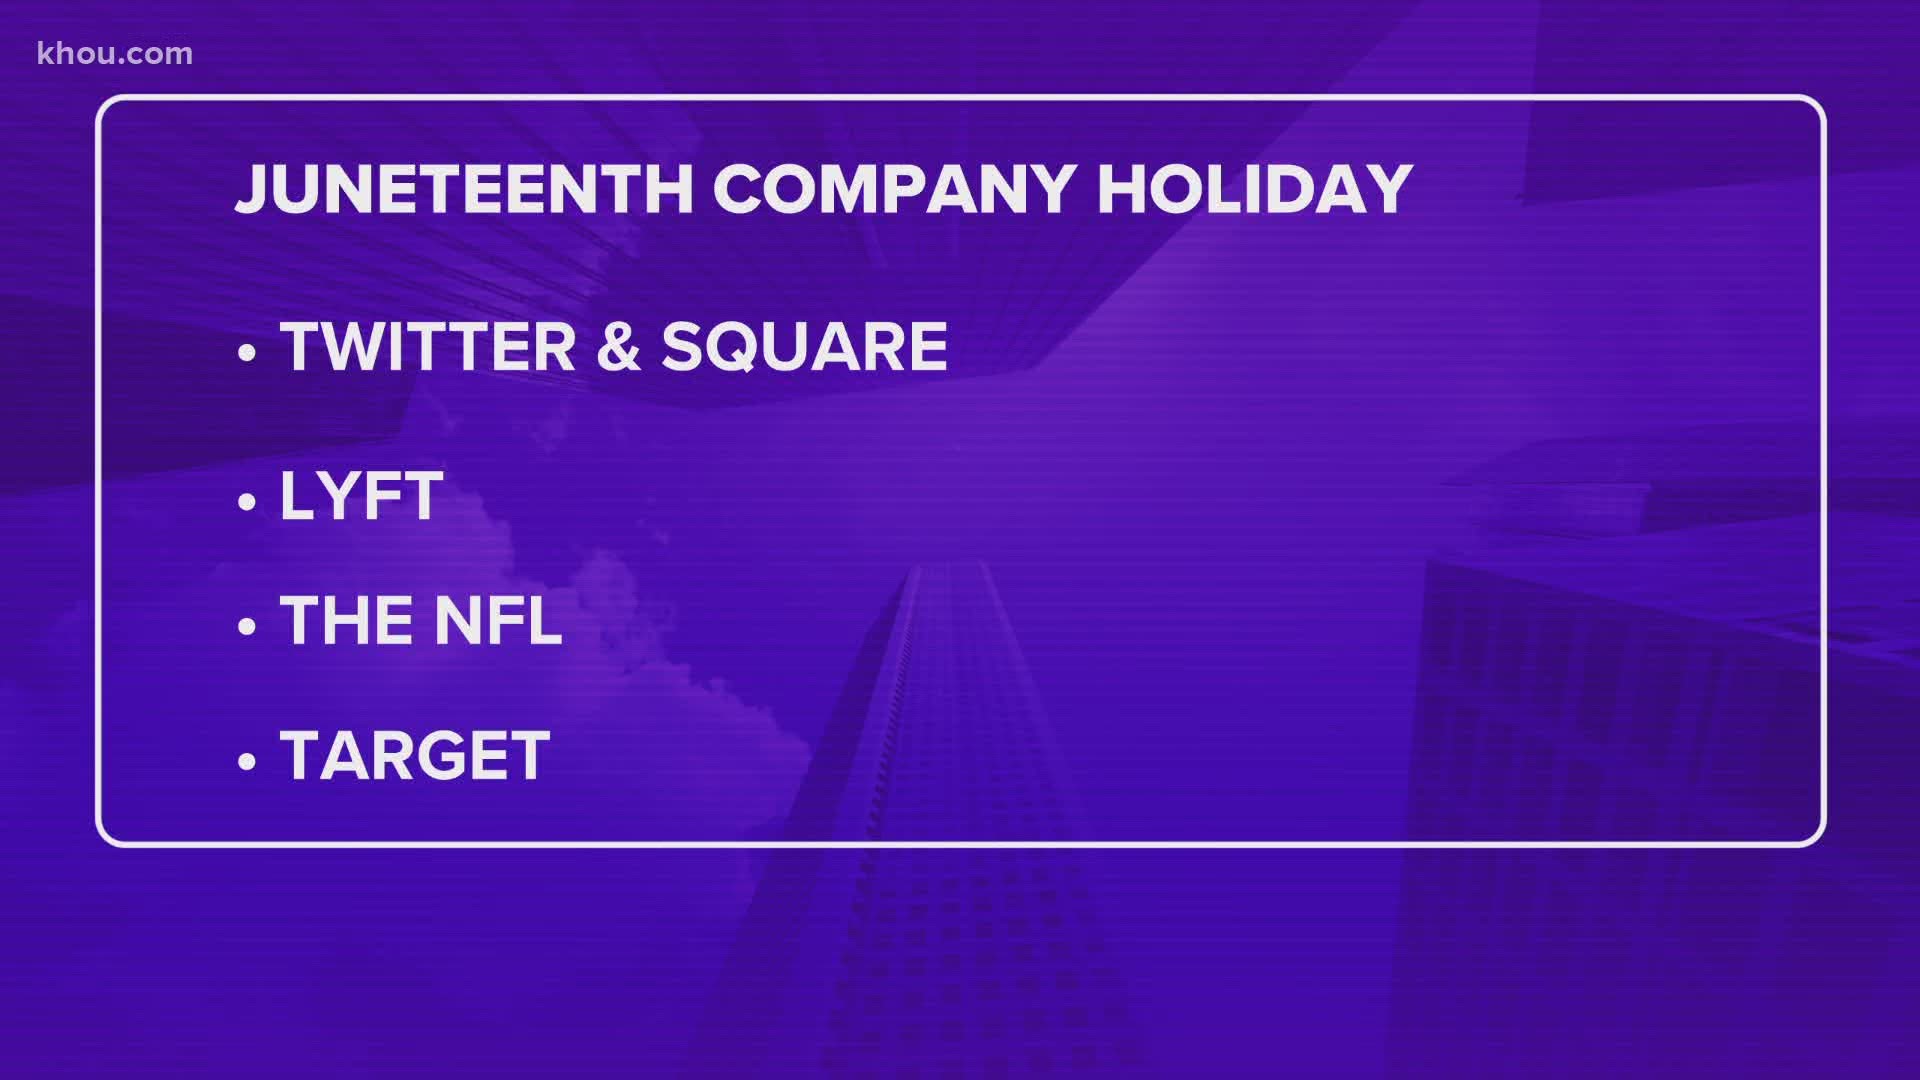 A growing list of companies have decided to make Juneteenth, which commemorates the ending of slavery in America, a paid company holiday.